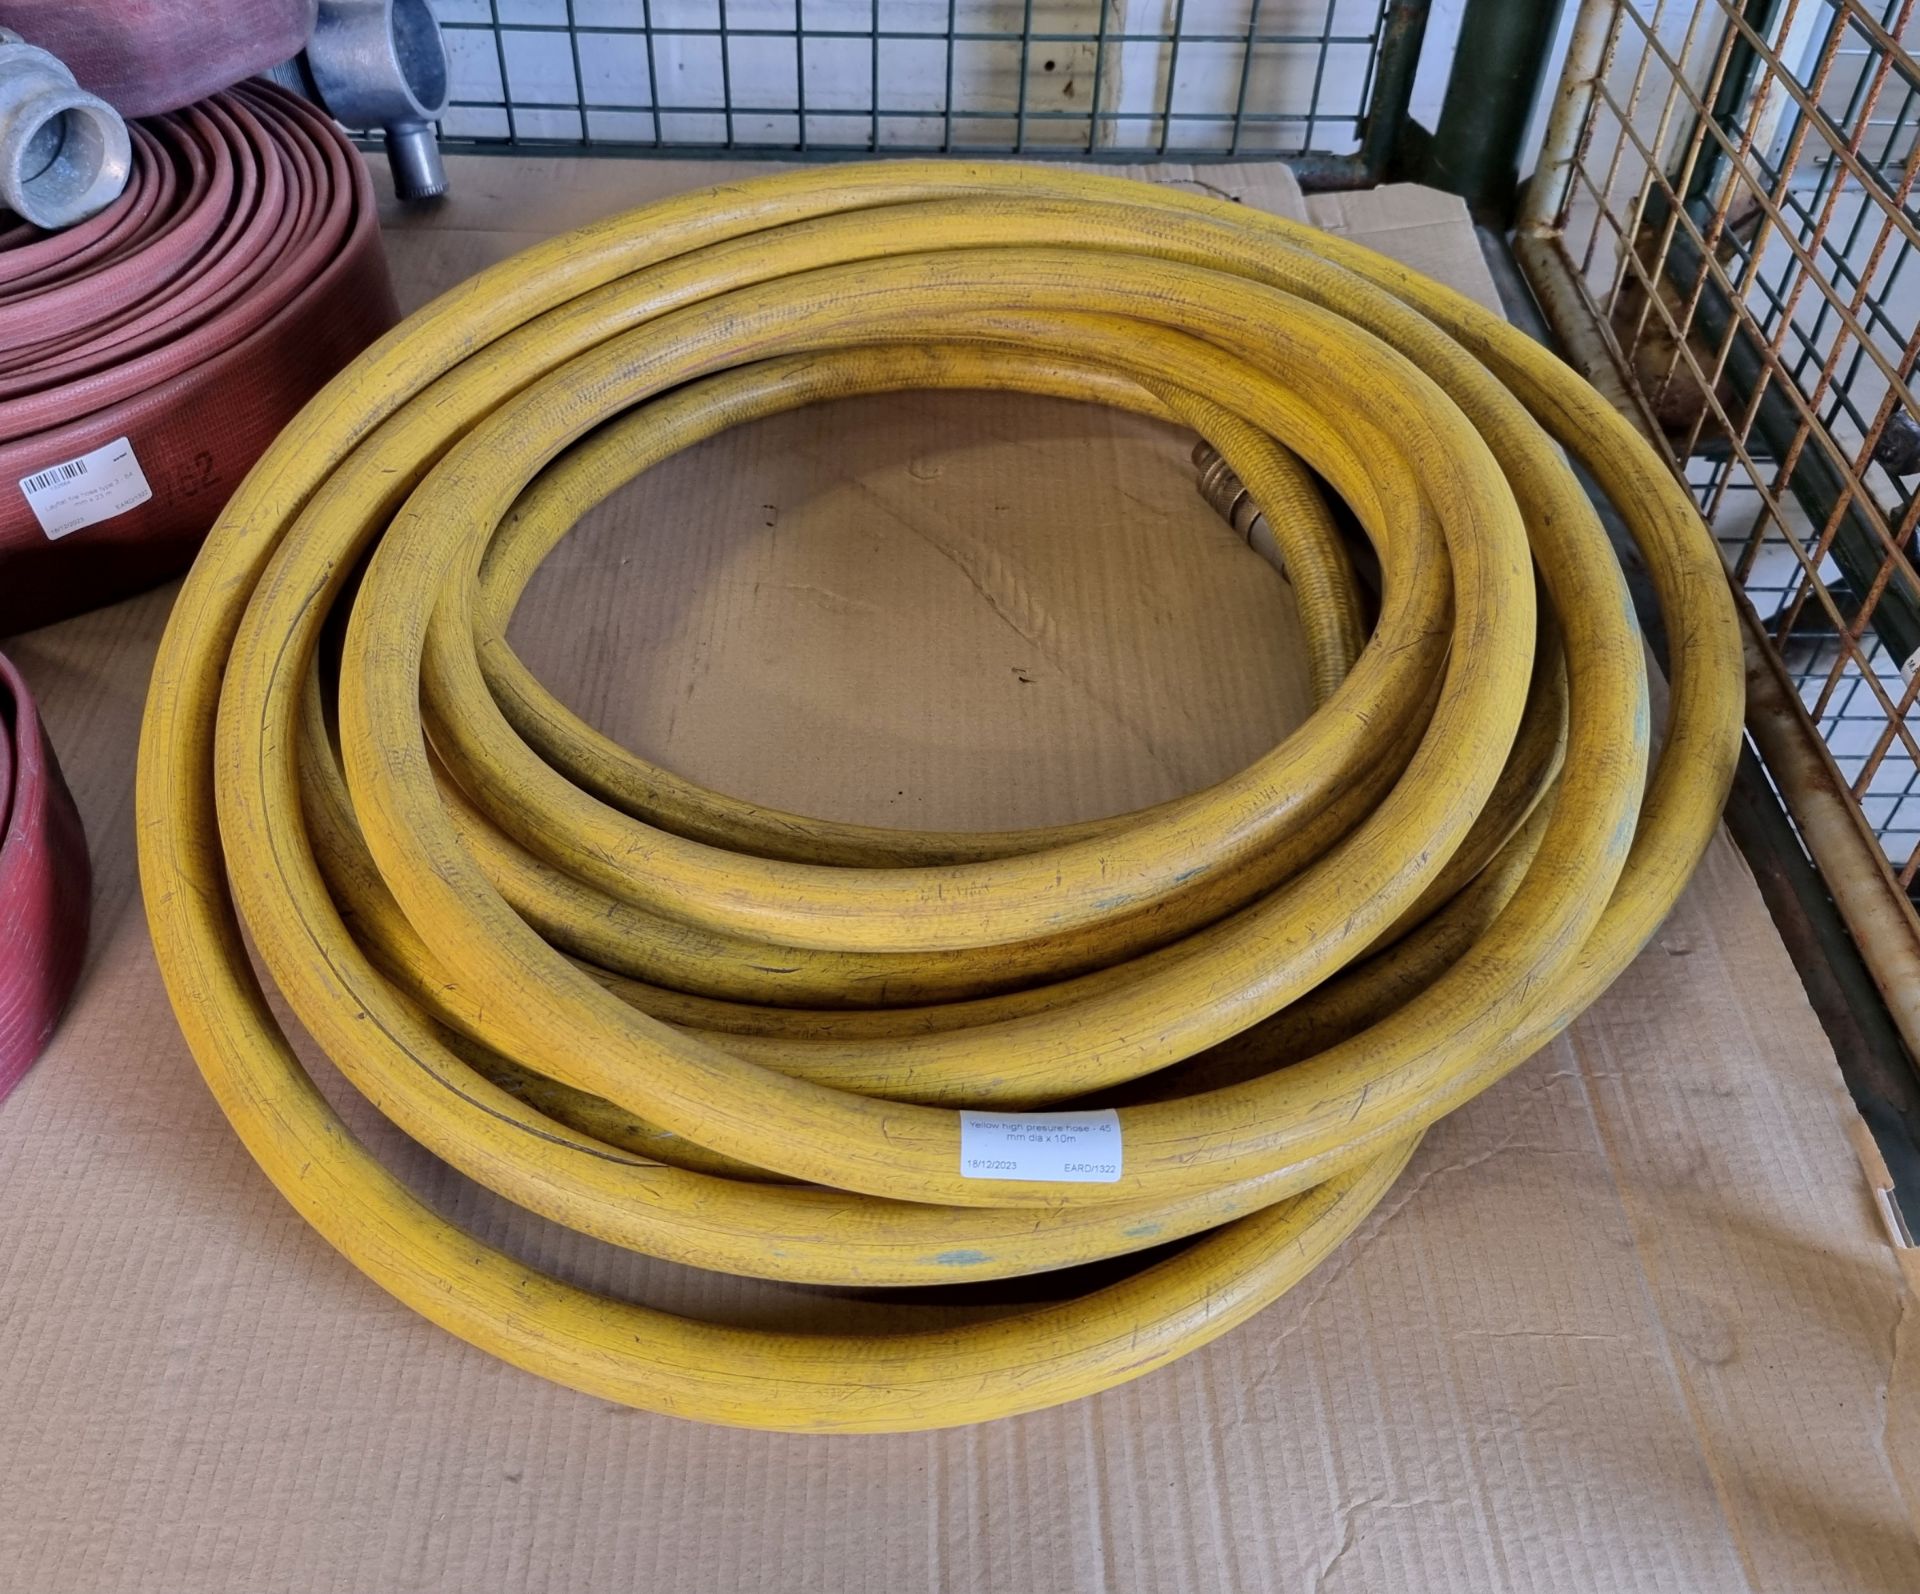 Yellow high pressure hose - 45mm dia x 10m, Layflat fire hose - see description for details - Image 2 of 5